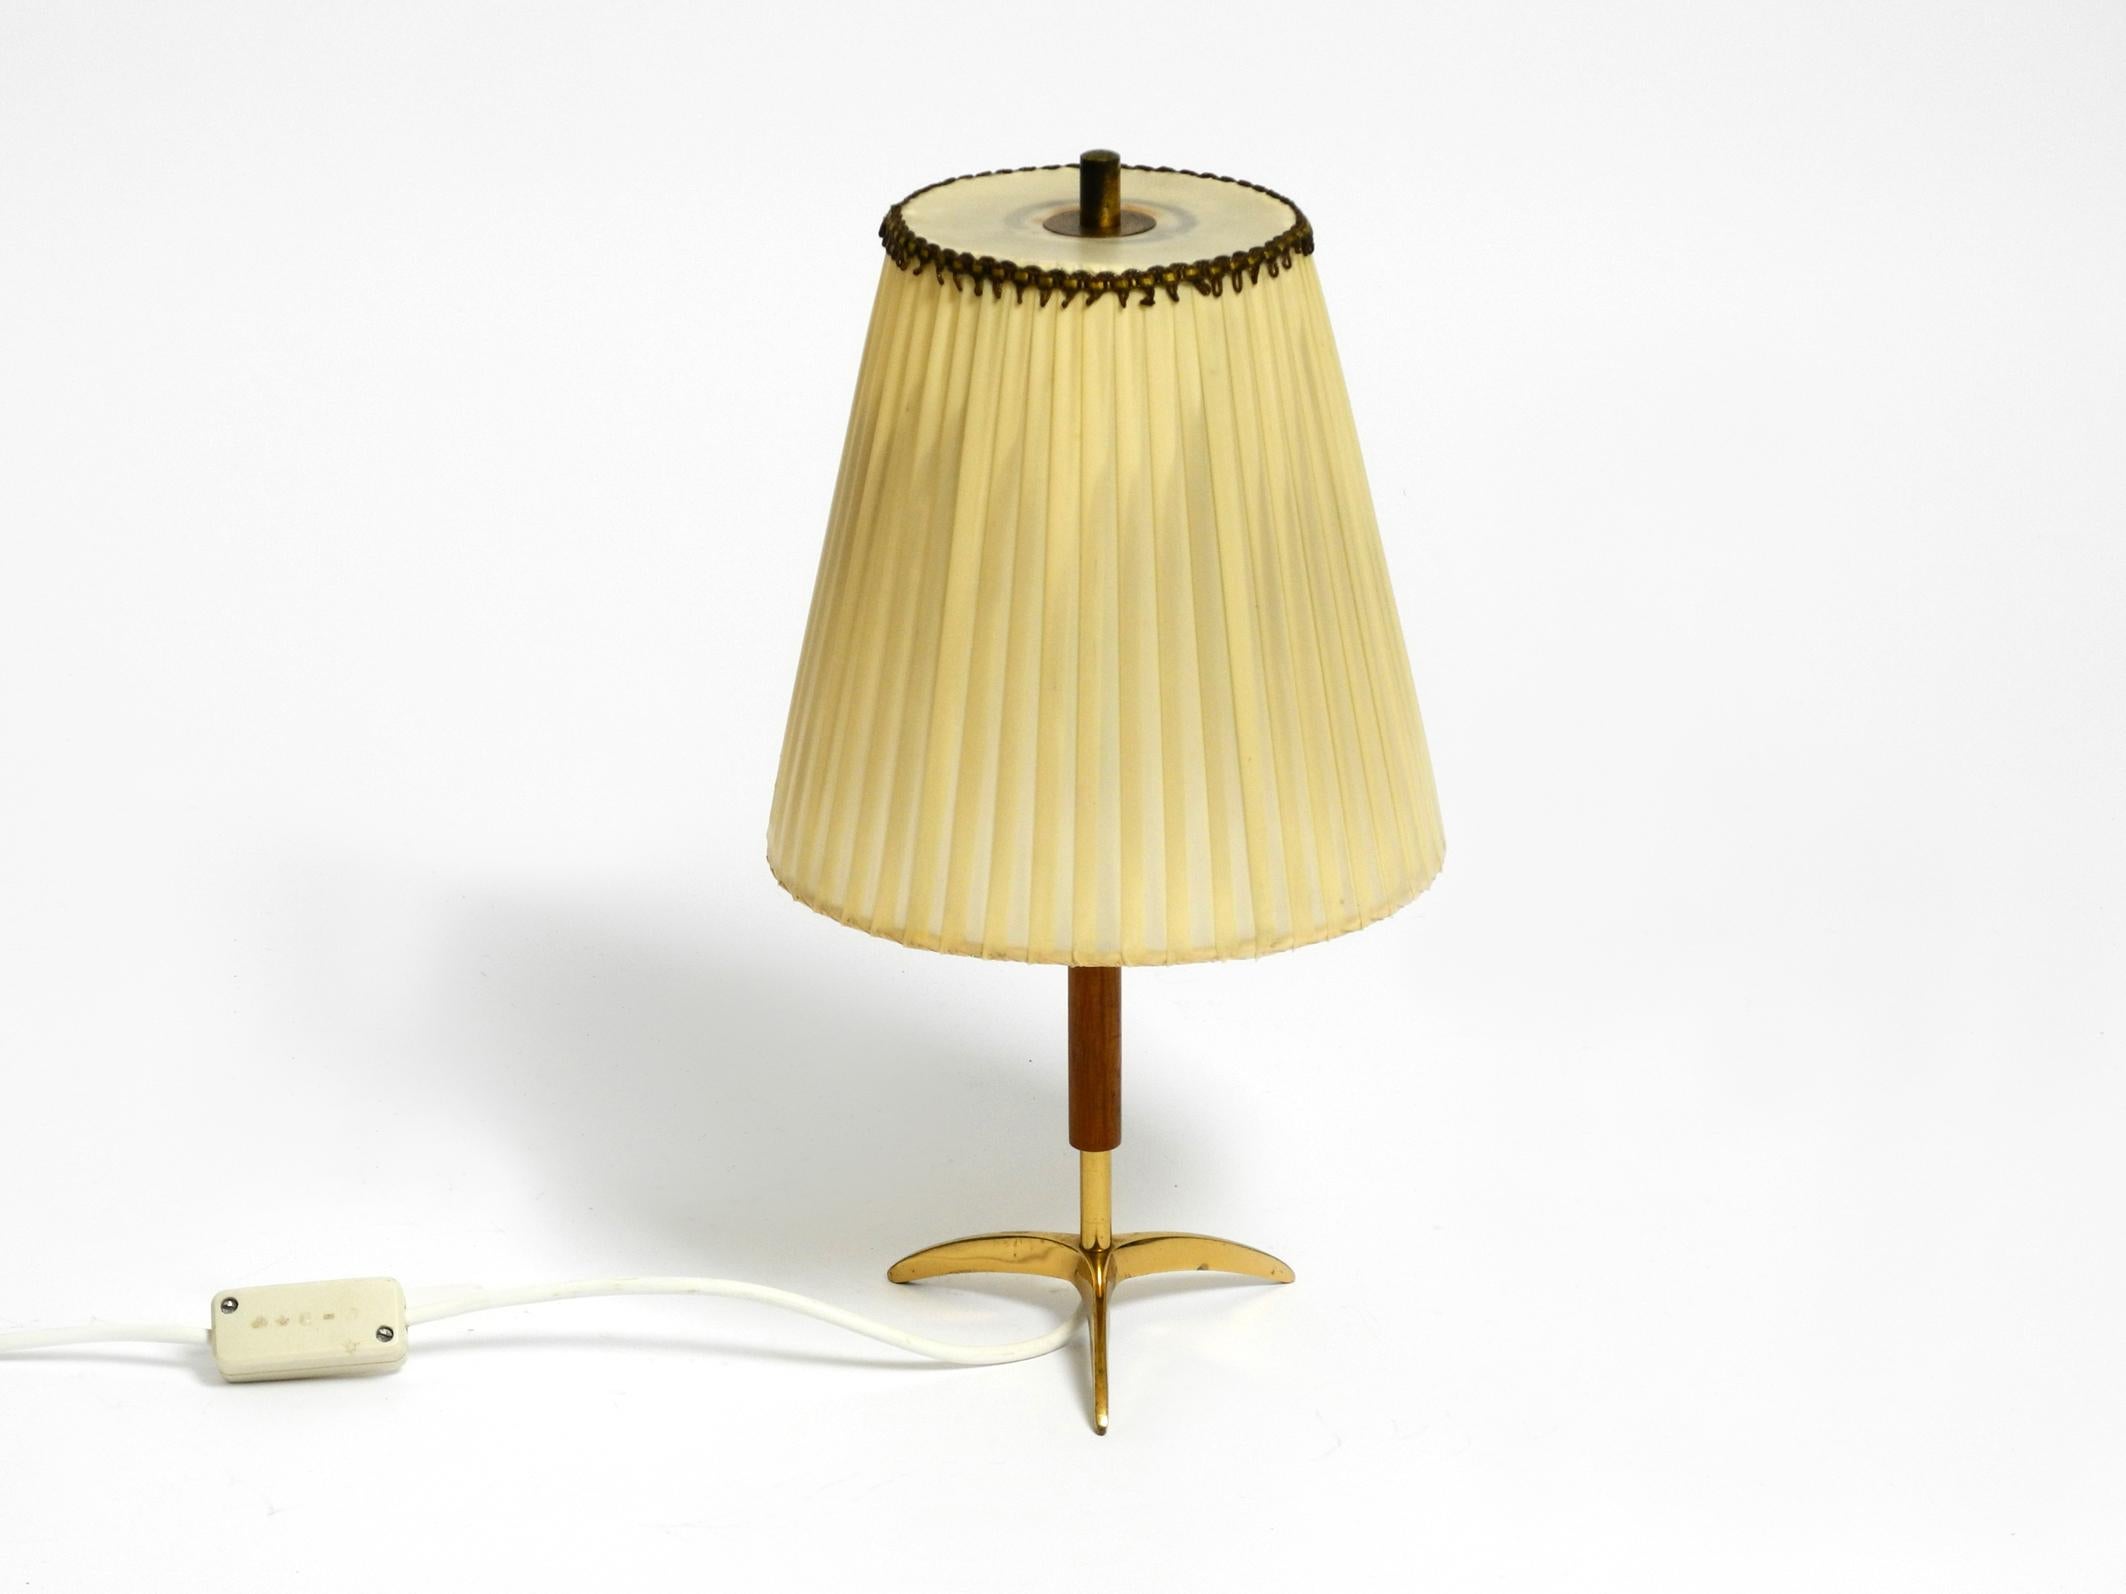 Beautiful small Mid Century brass table lamp with original pleated lampshade.
The shade is made of thin plastic, almost like a rough foil. Makes a beautiful light.
Made by Kalmar in the 50s. Made in Austria.
Very nice typical Mid Century design with